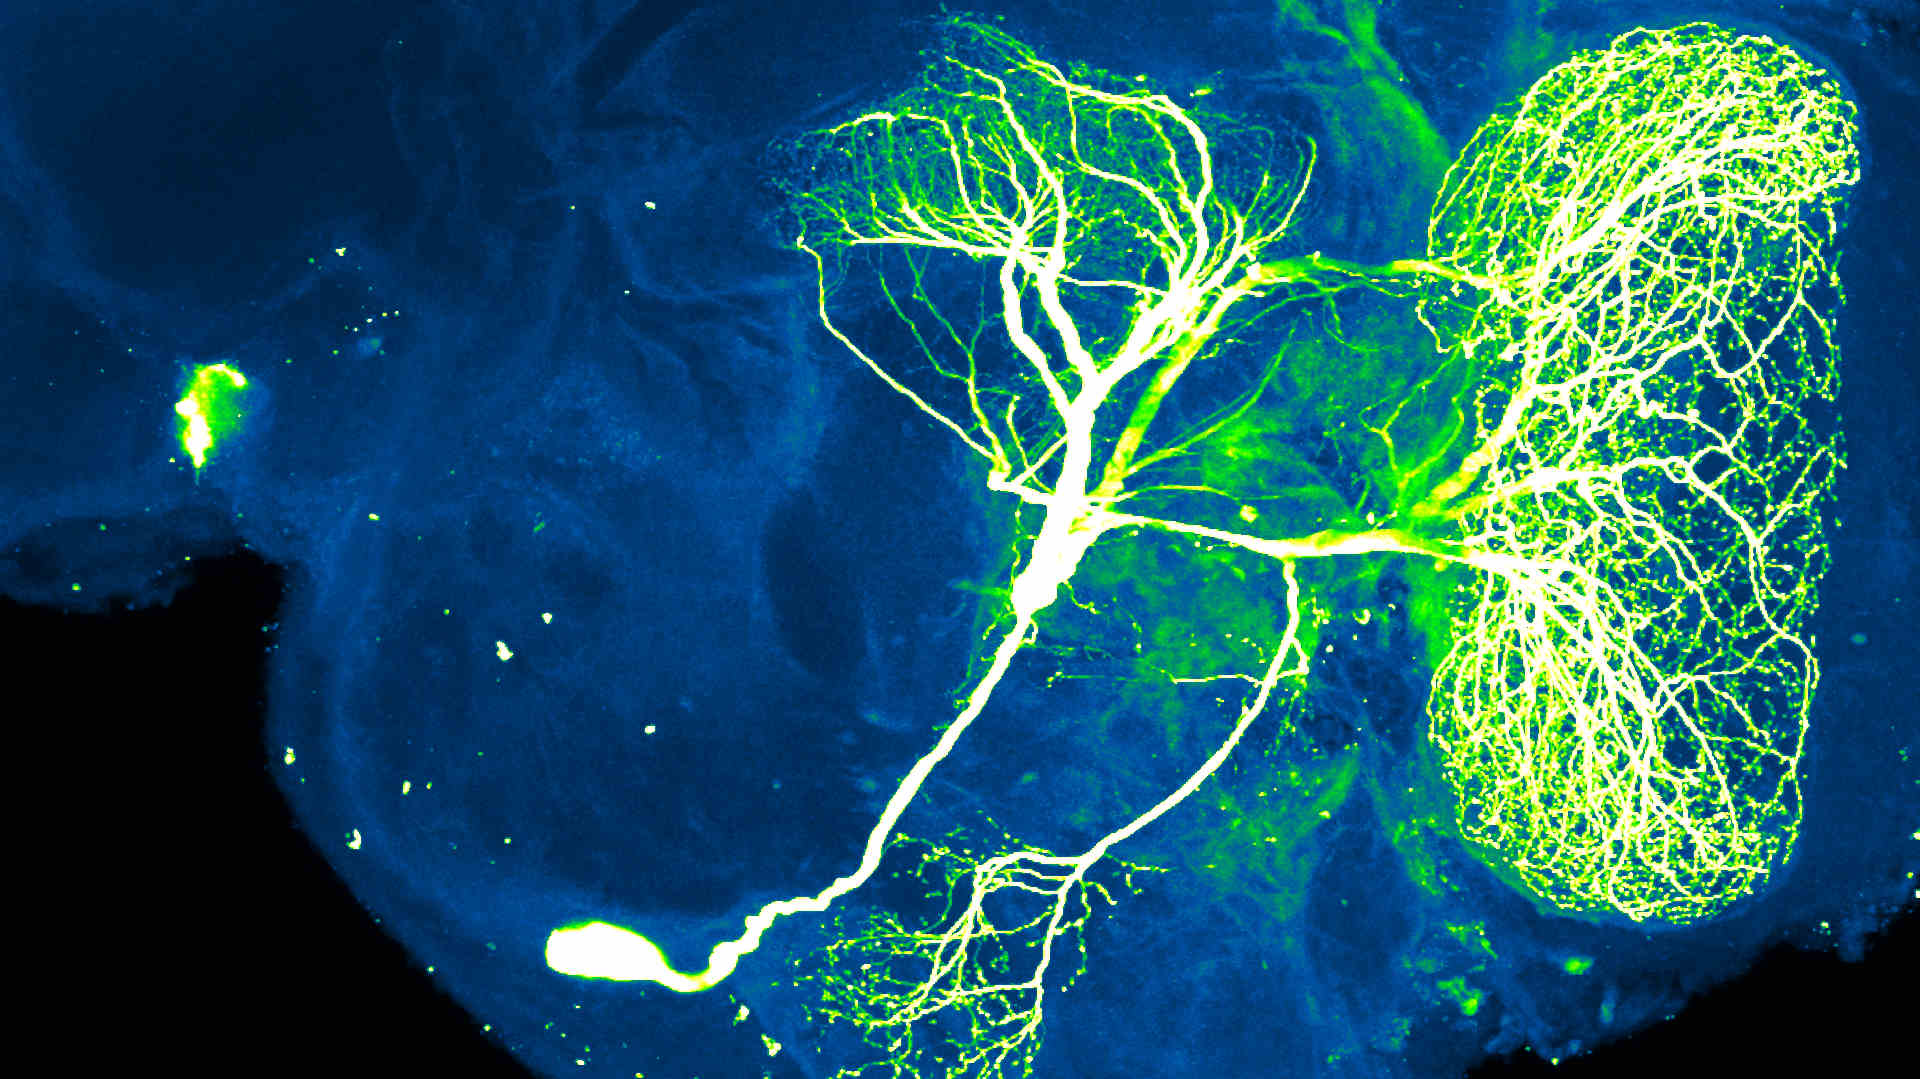 A neuron (green and white) in an insect brain (blue).